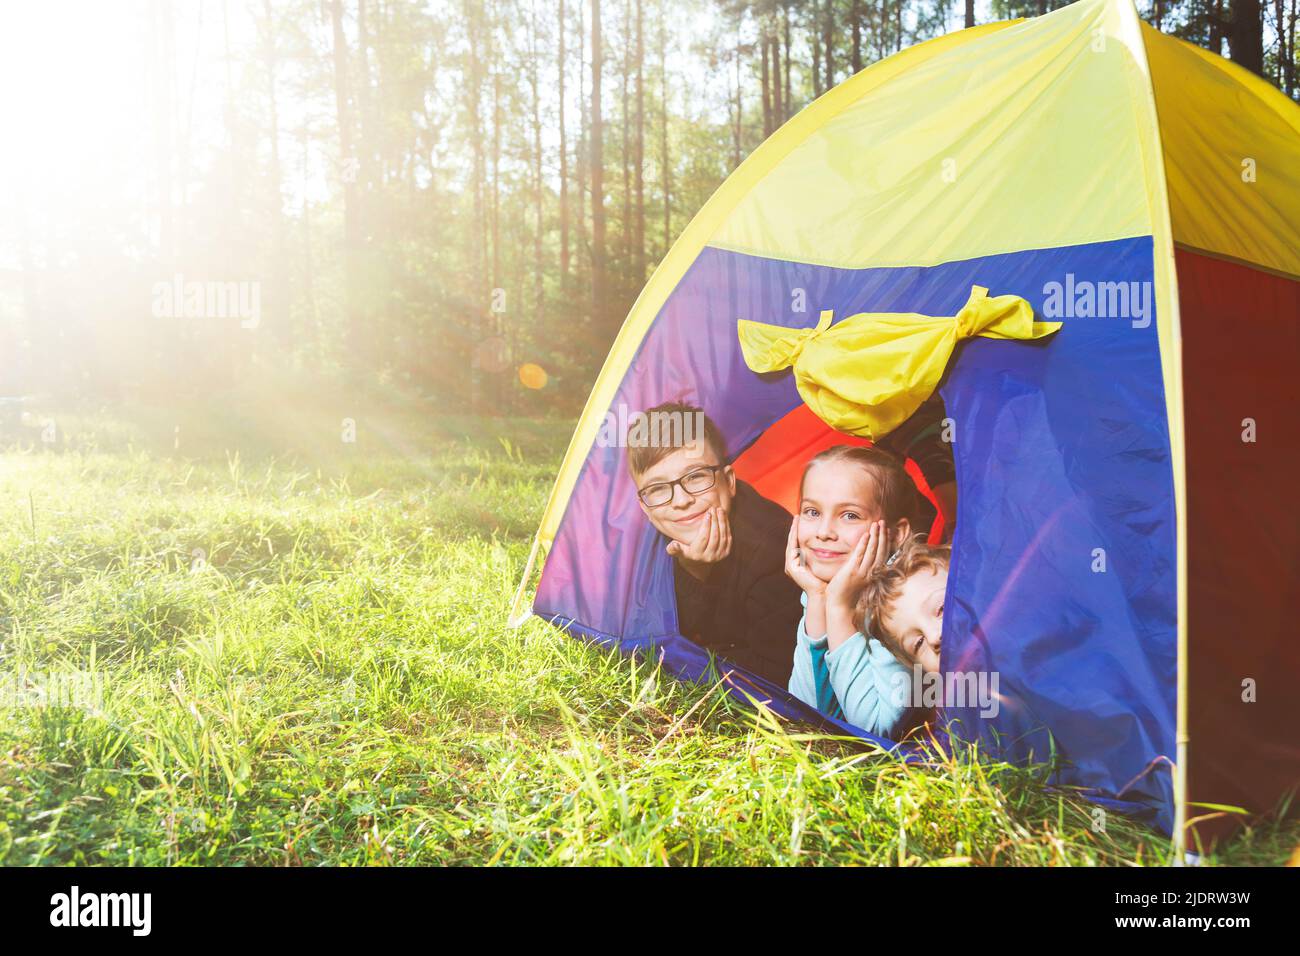 Children lying in a tent on a sunny meadow enjoying summer forest camping. The sun shines through the trees. Family summer vacation concept Stock Photo